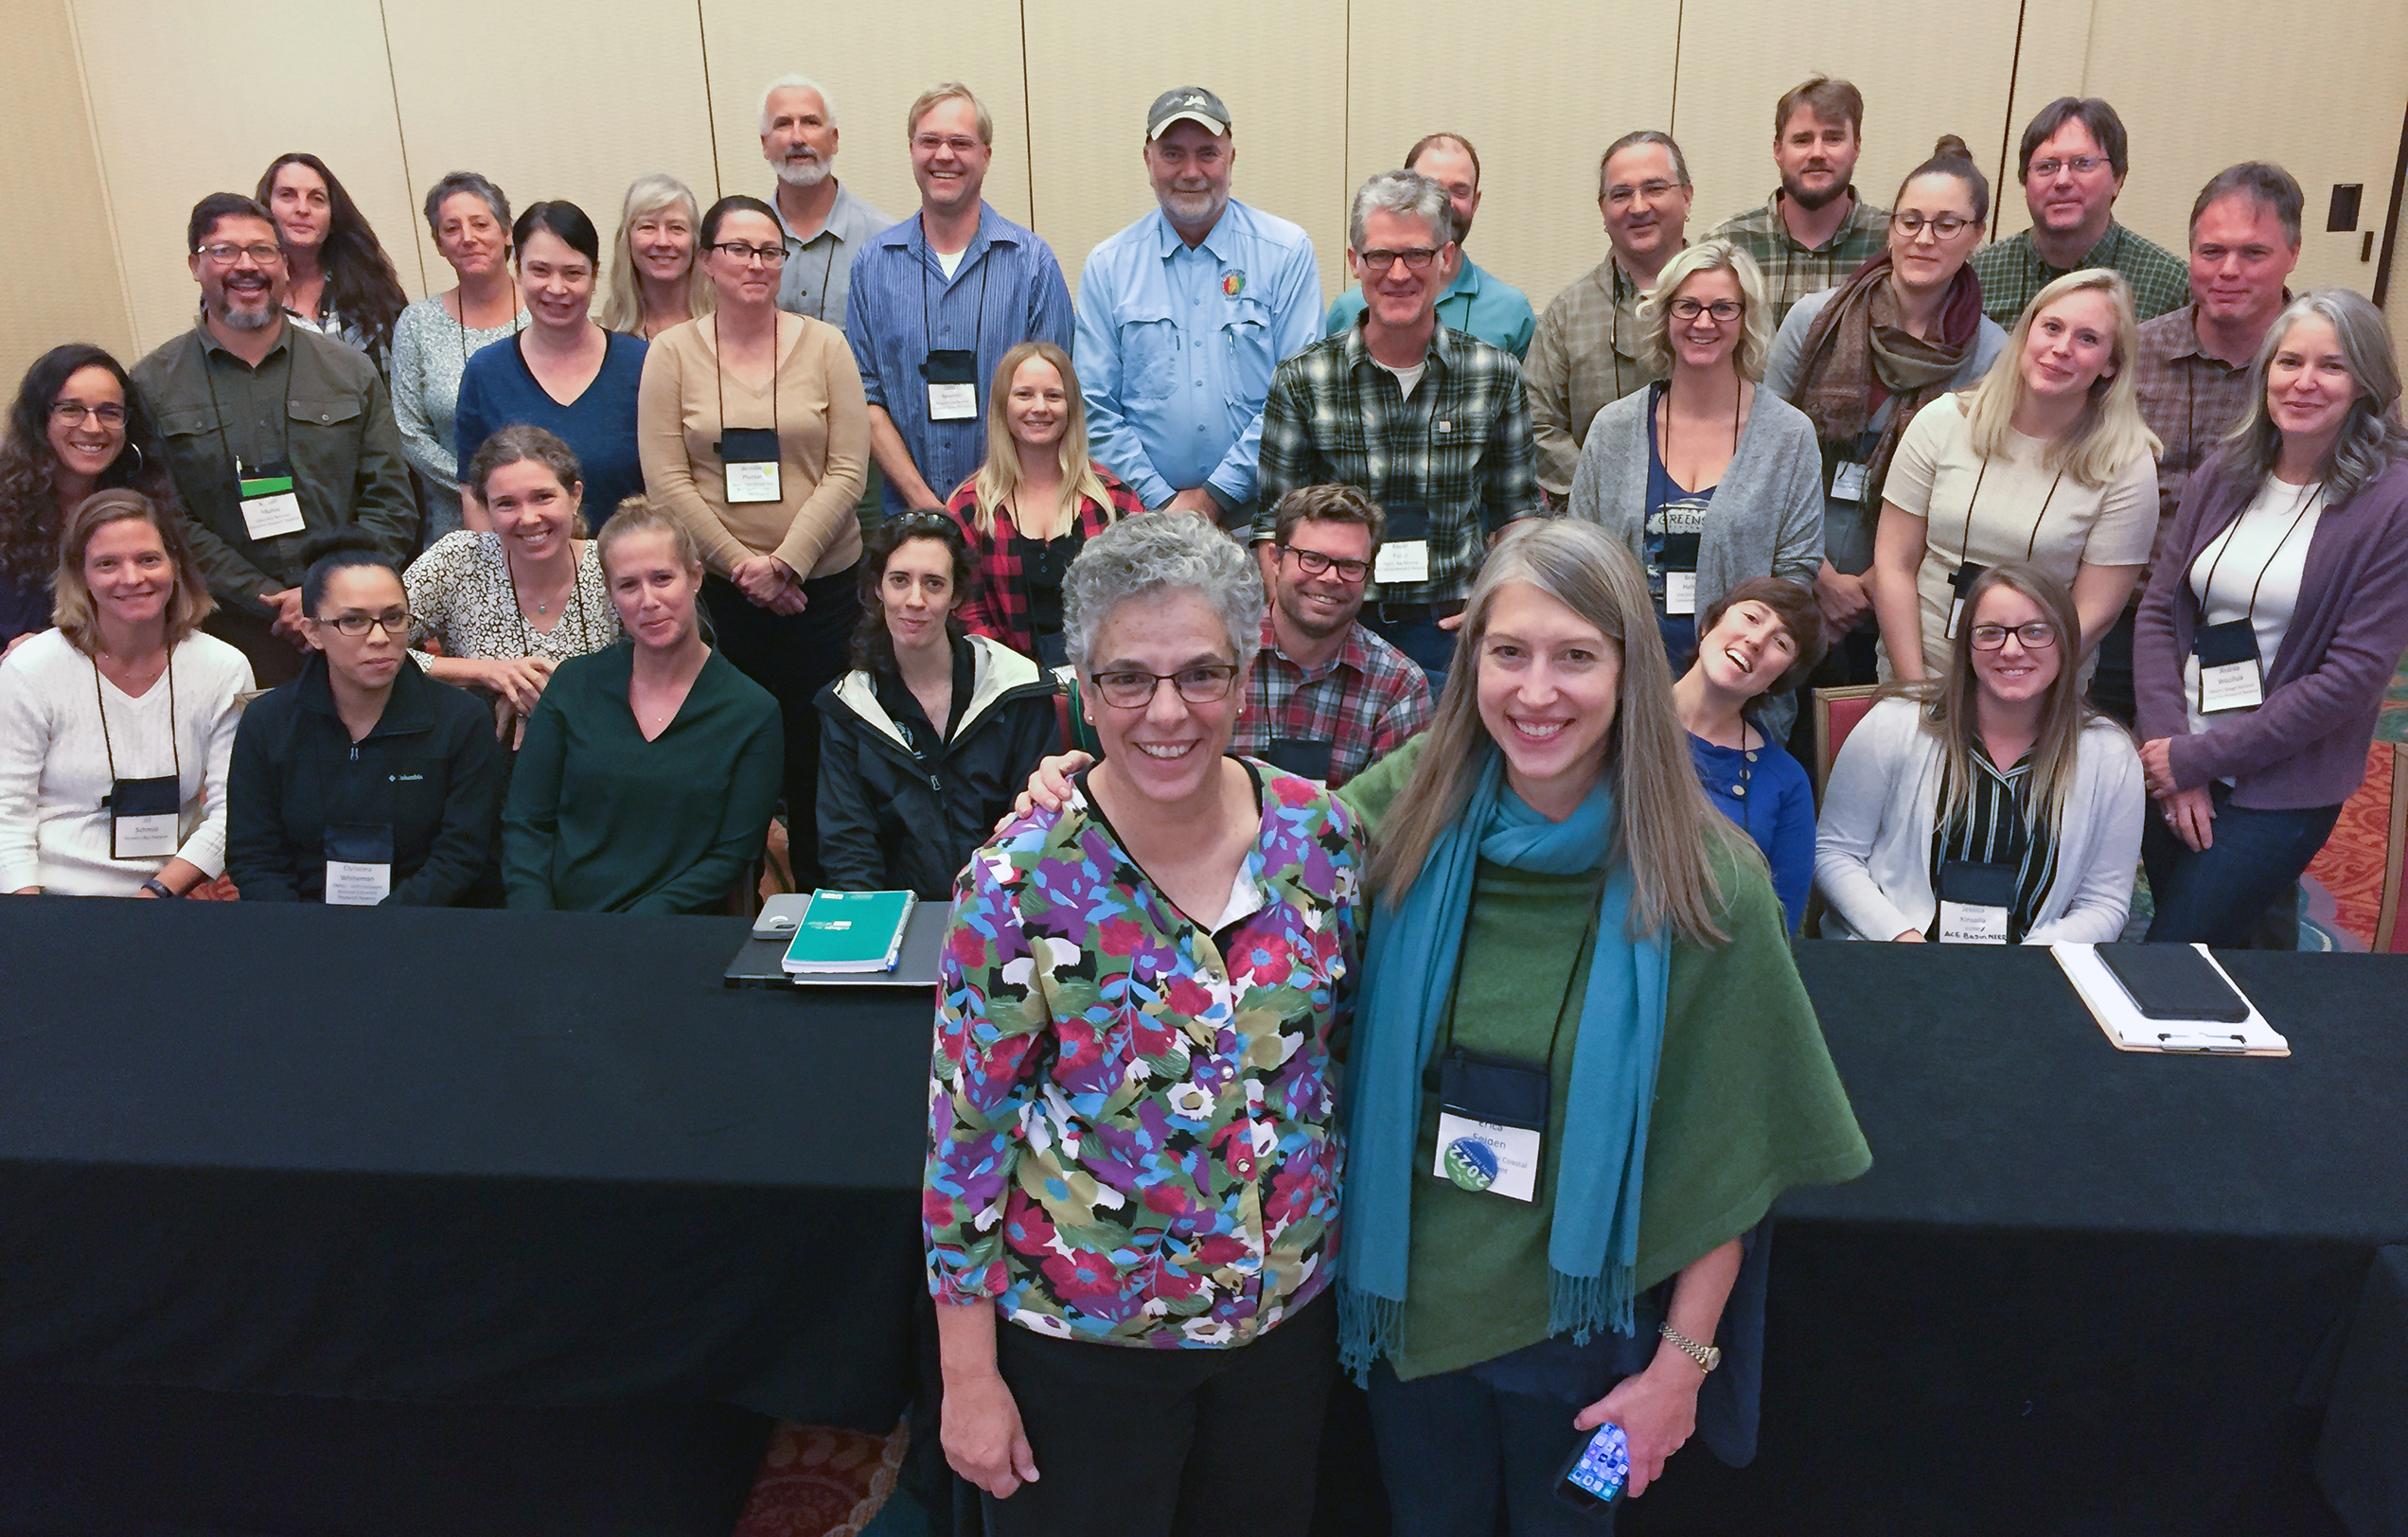 Sue Bickford (front left) accepts congratulations from NOAA Program Manager Erica Seiden at the 2019 NERRS/NERRA meeting. They are joined by stewardship coordinators and others from throughout the system.